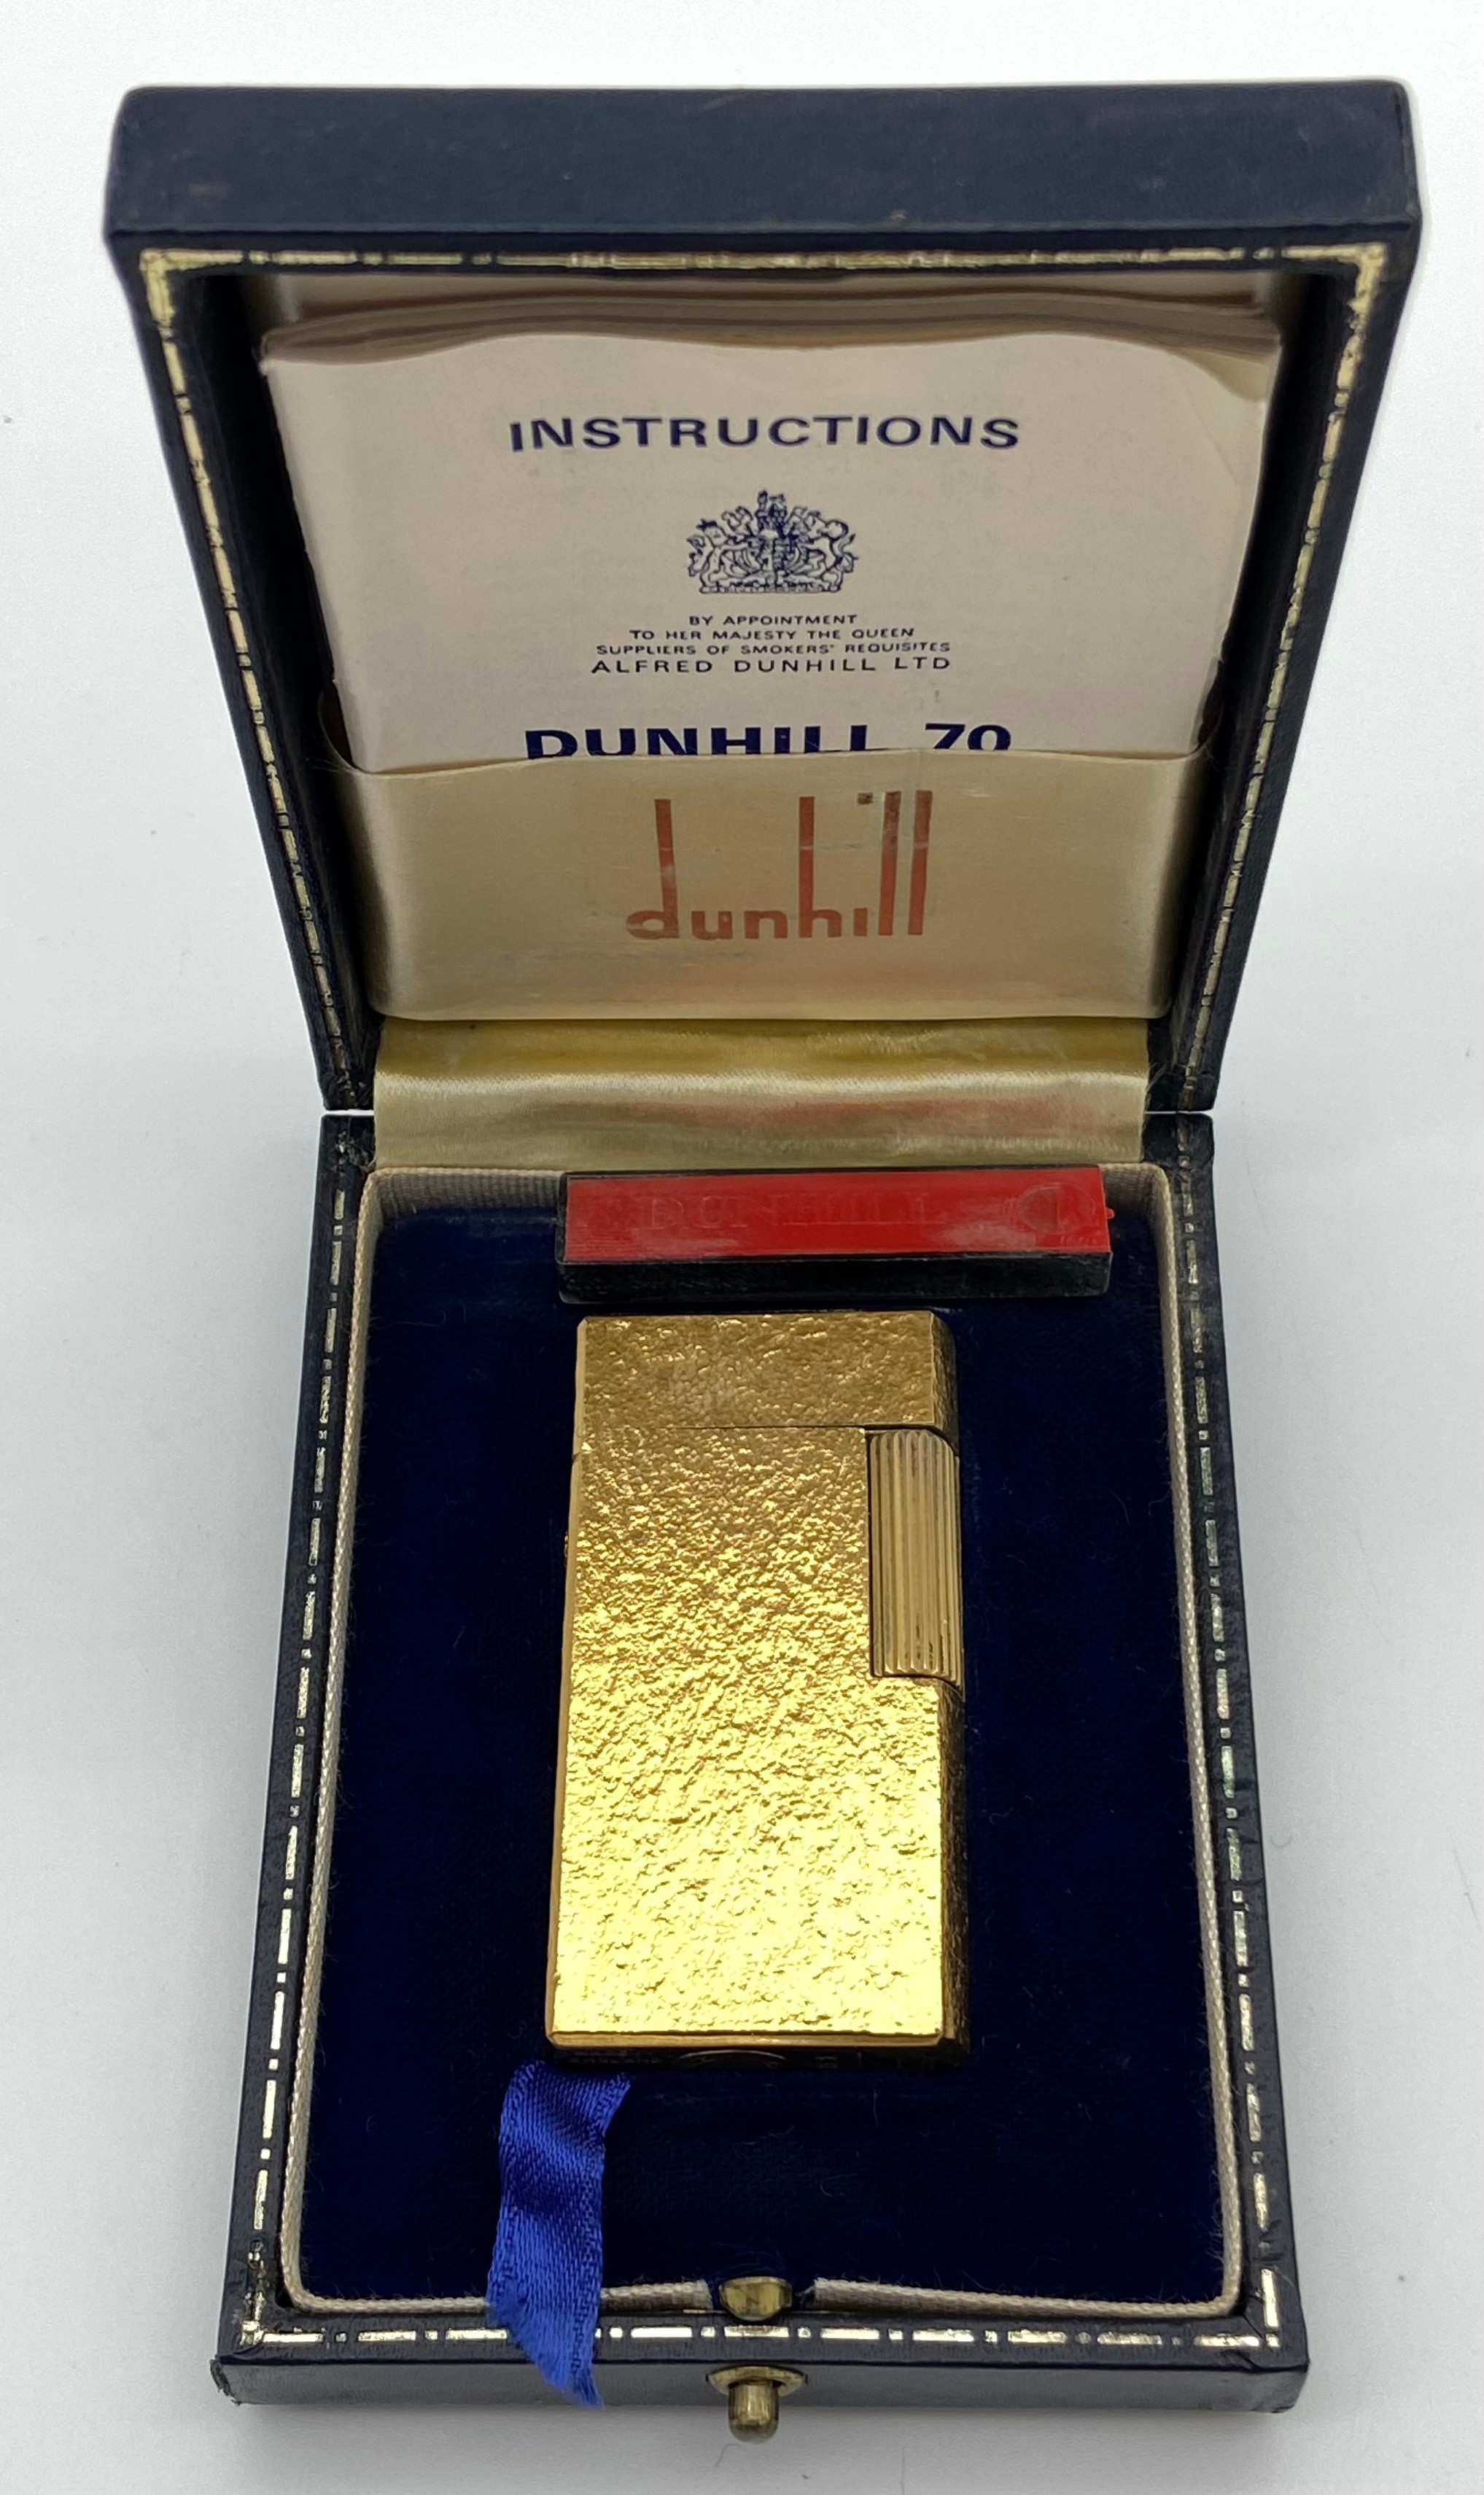 A Vintage Dunhill 70 gold plated lighter, box and instructions